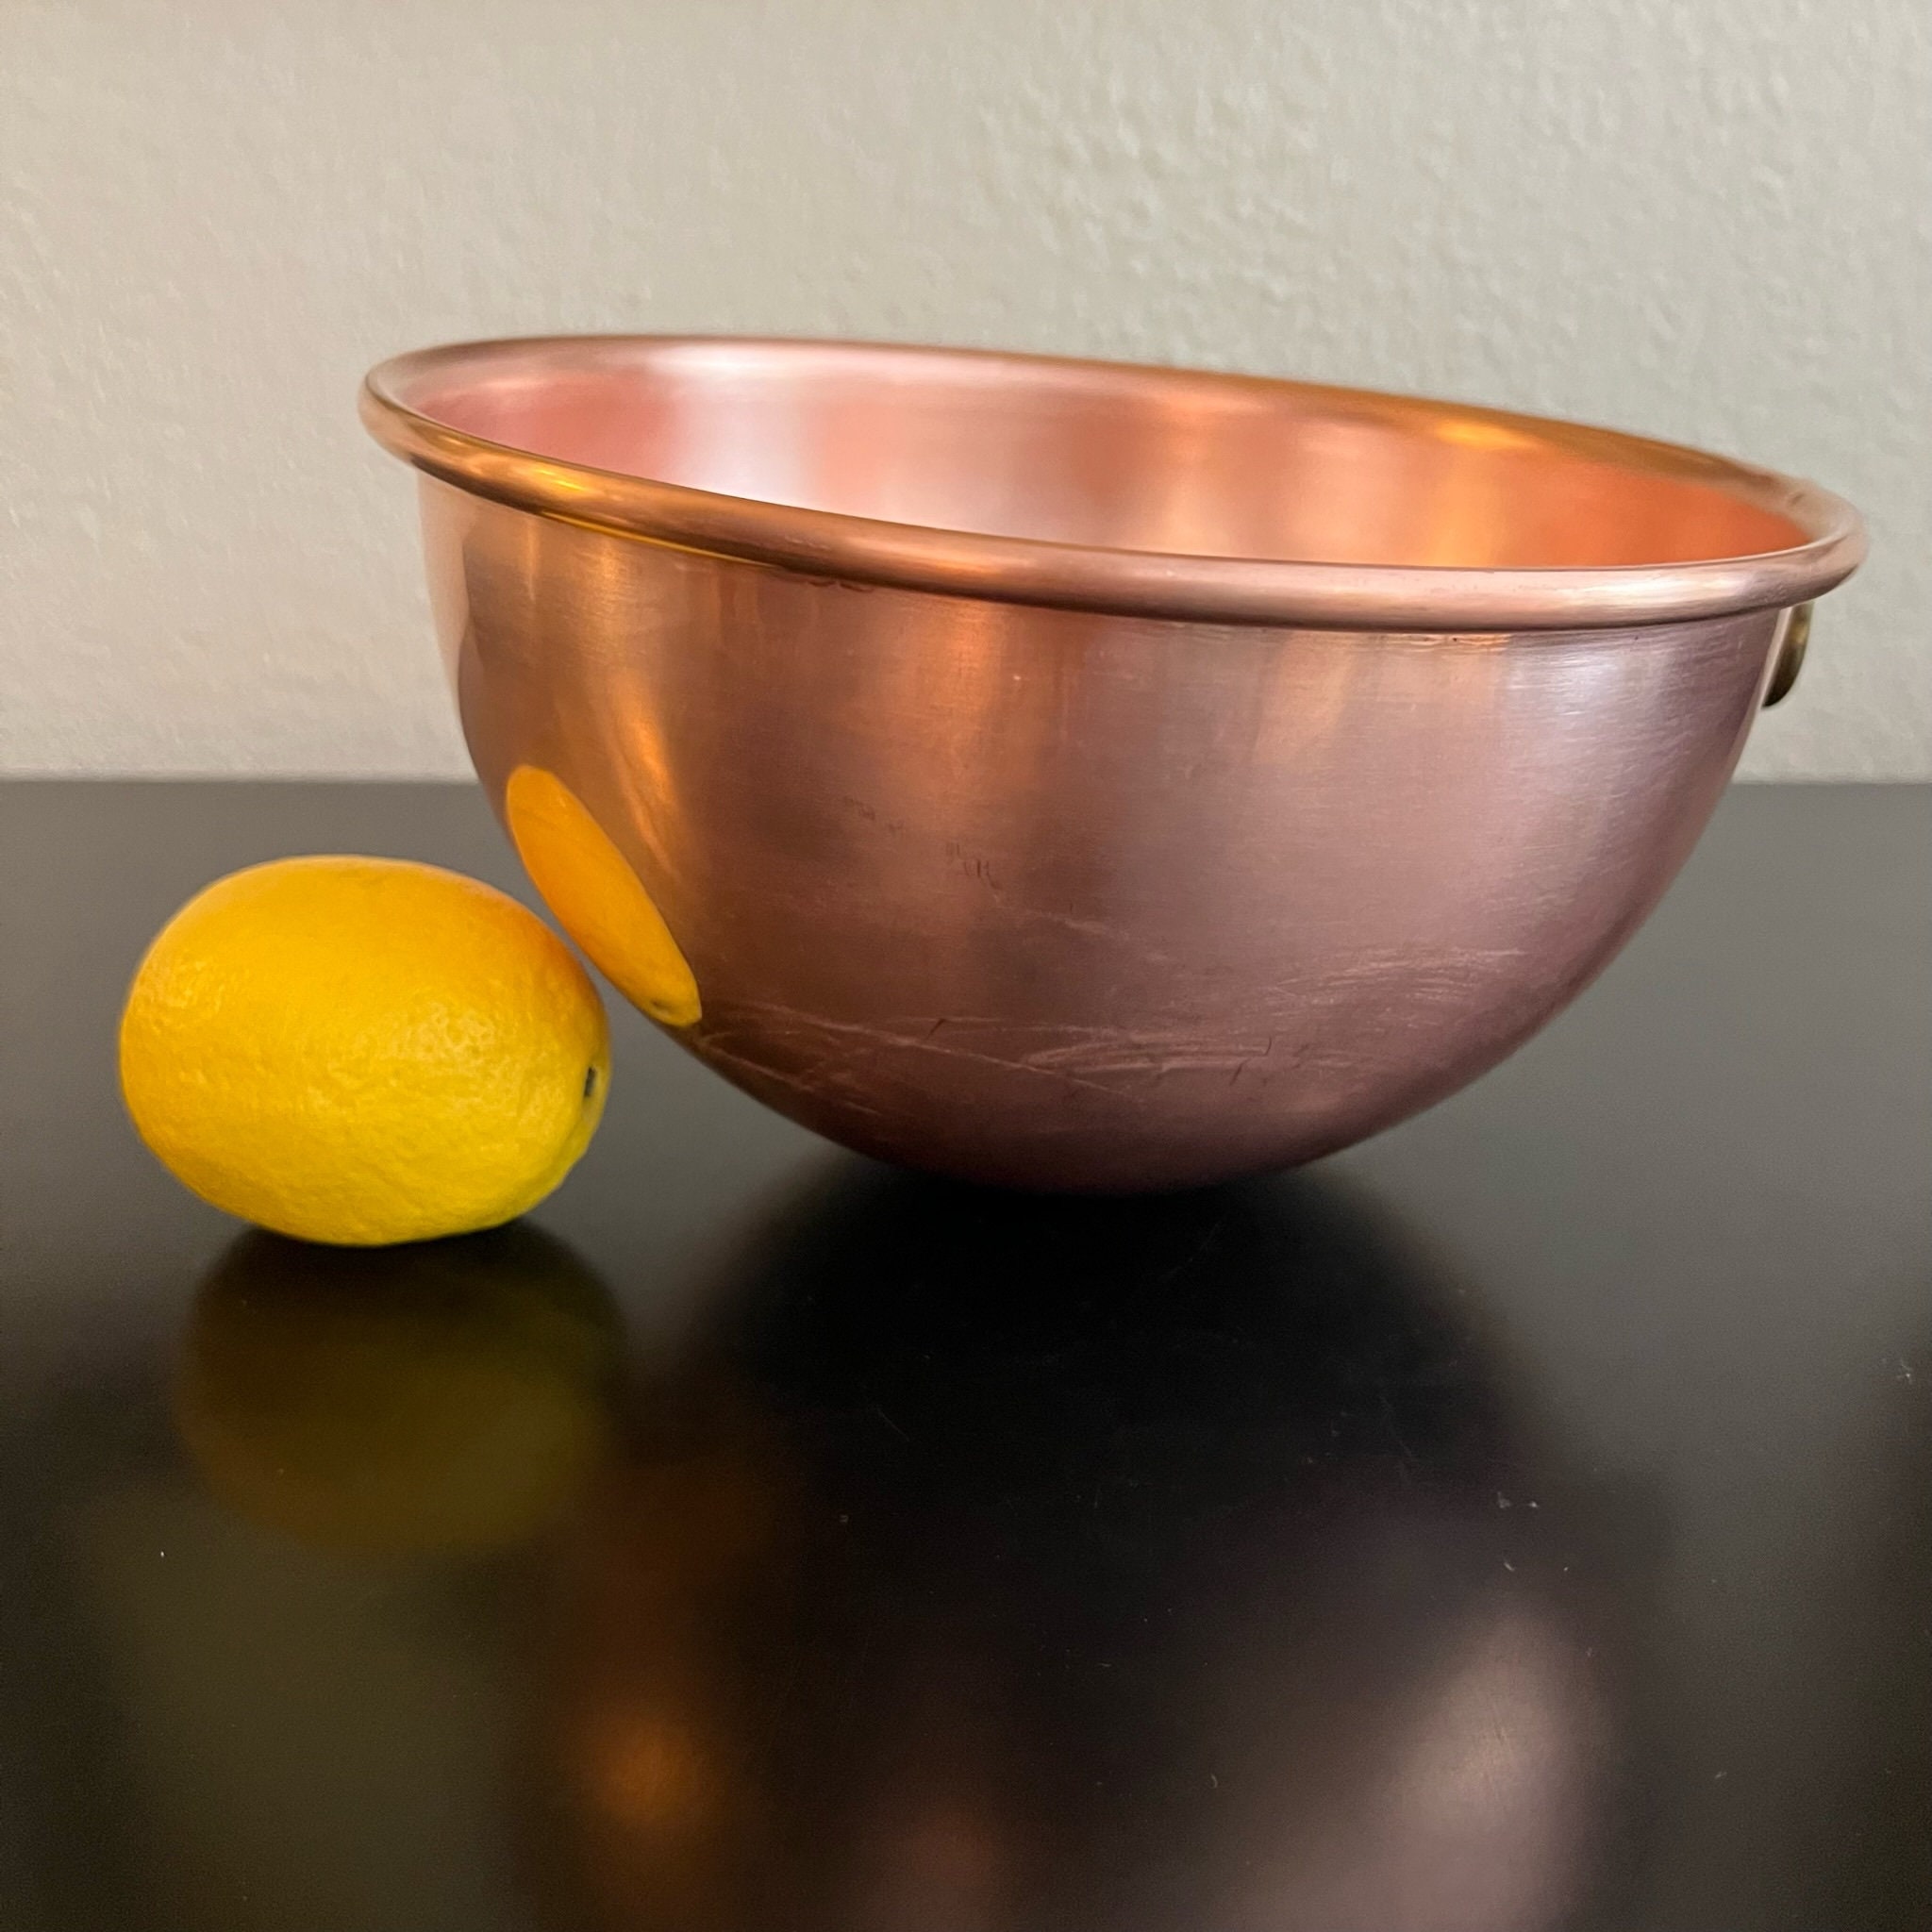 Vintage Ring Grip Copper Mixing Bowl Made in England English Copper Mixing  Bowl Whipping Bowl Vintage Copper Bowl Vintage Baking 